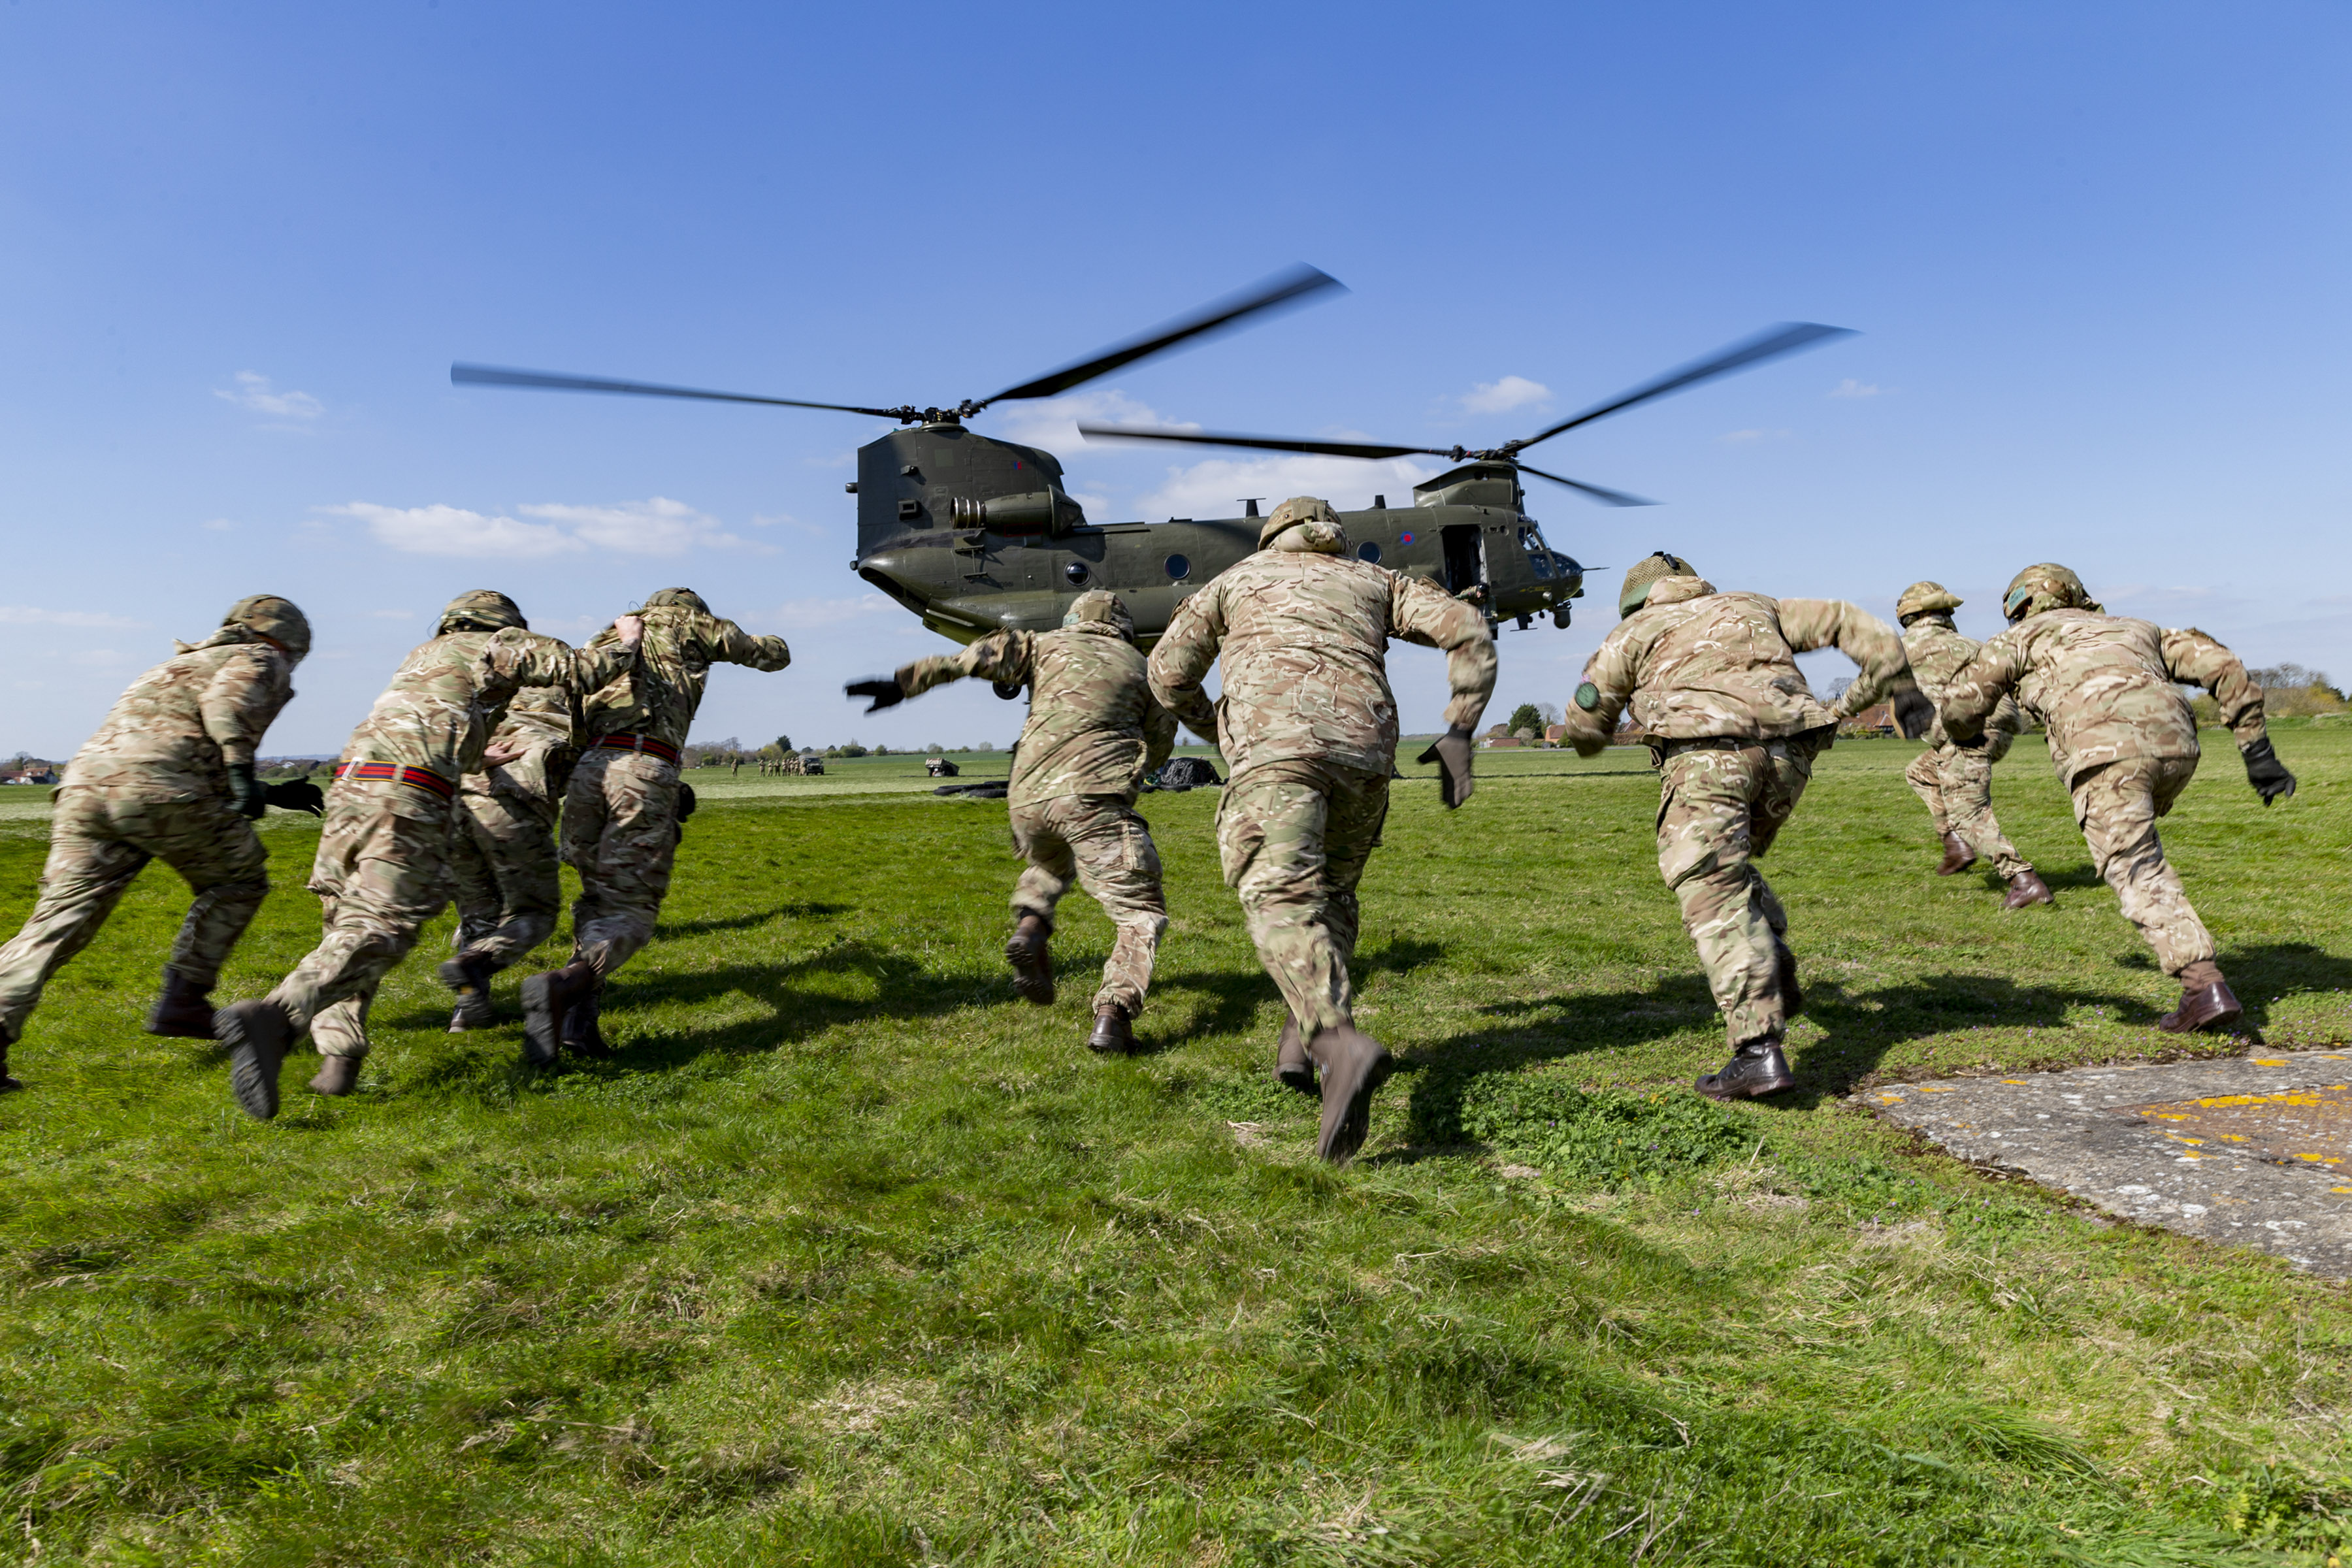 Image shows aviators running towards helicopter ready to take off.